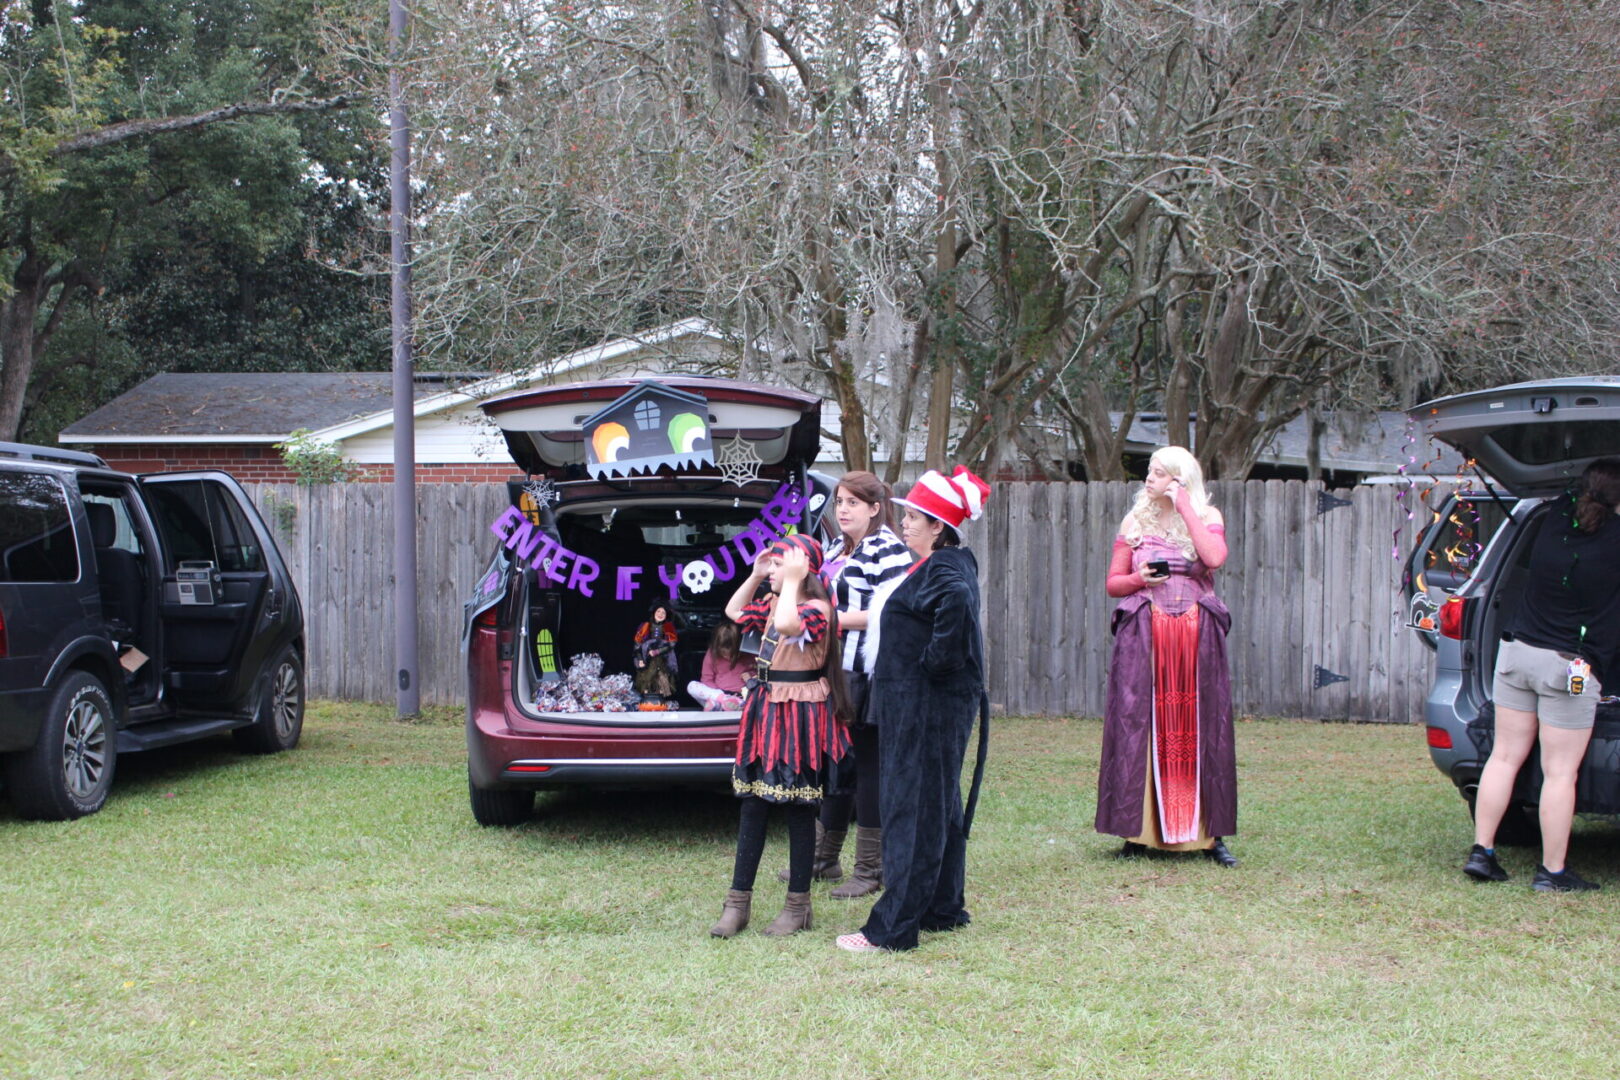 Three people standing in front of a trunk with decorations on it.